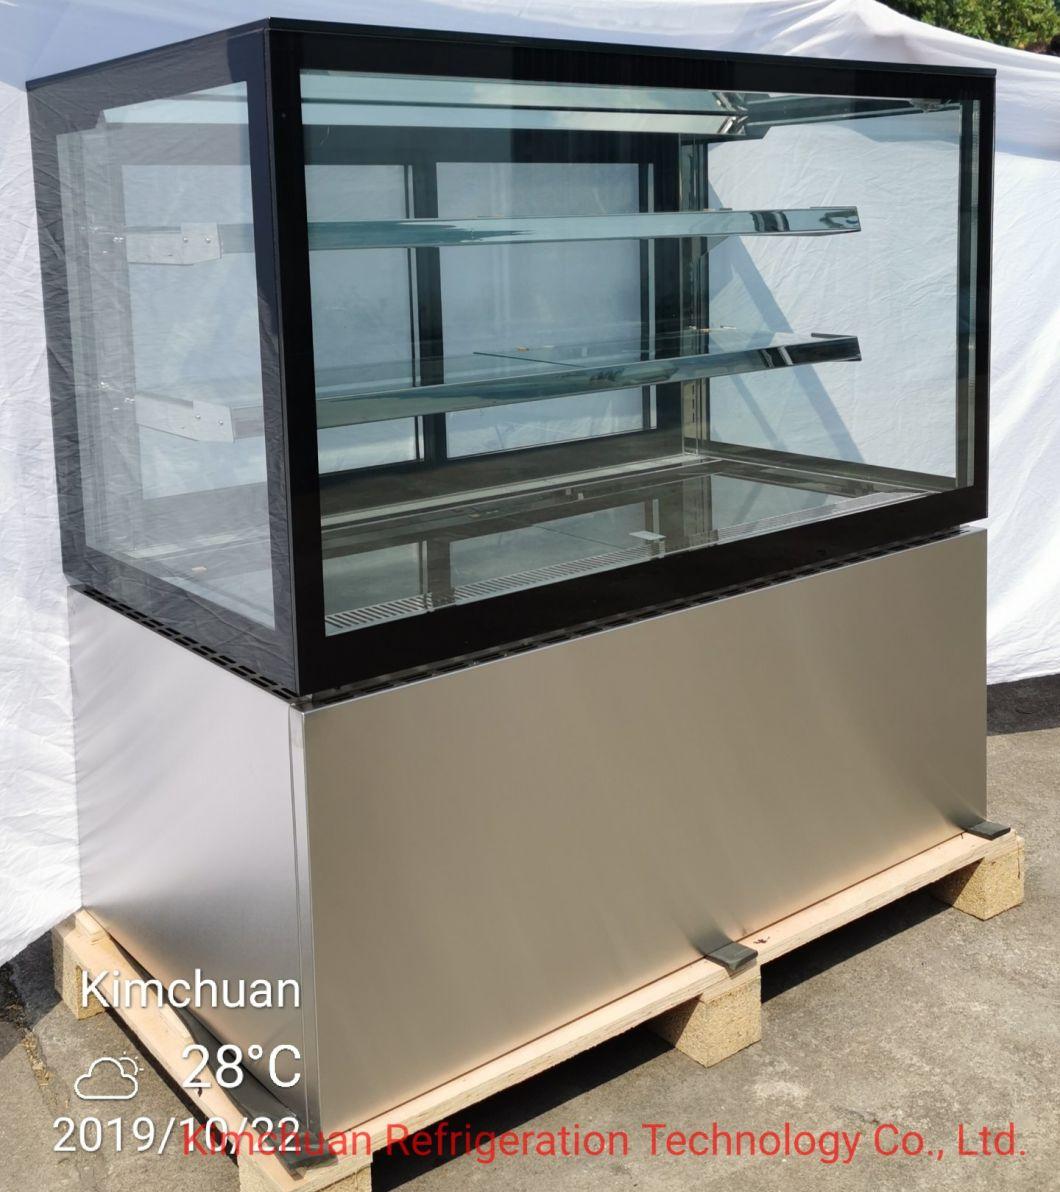 Bakery Display Cake Showcase Chiller Stainless Steel Base China Manufacturer Wholesale Price Glass Display Coller